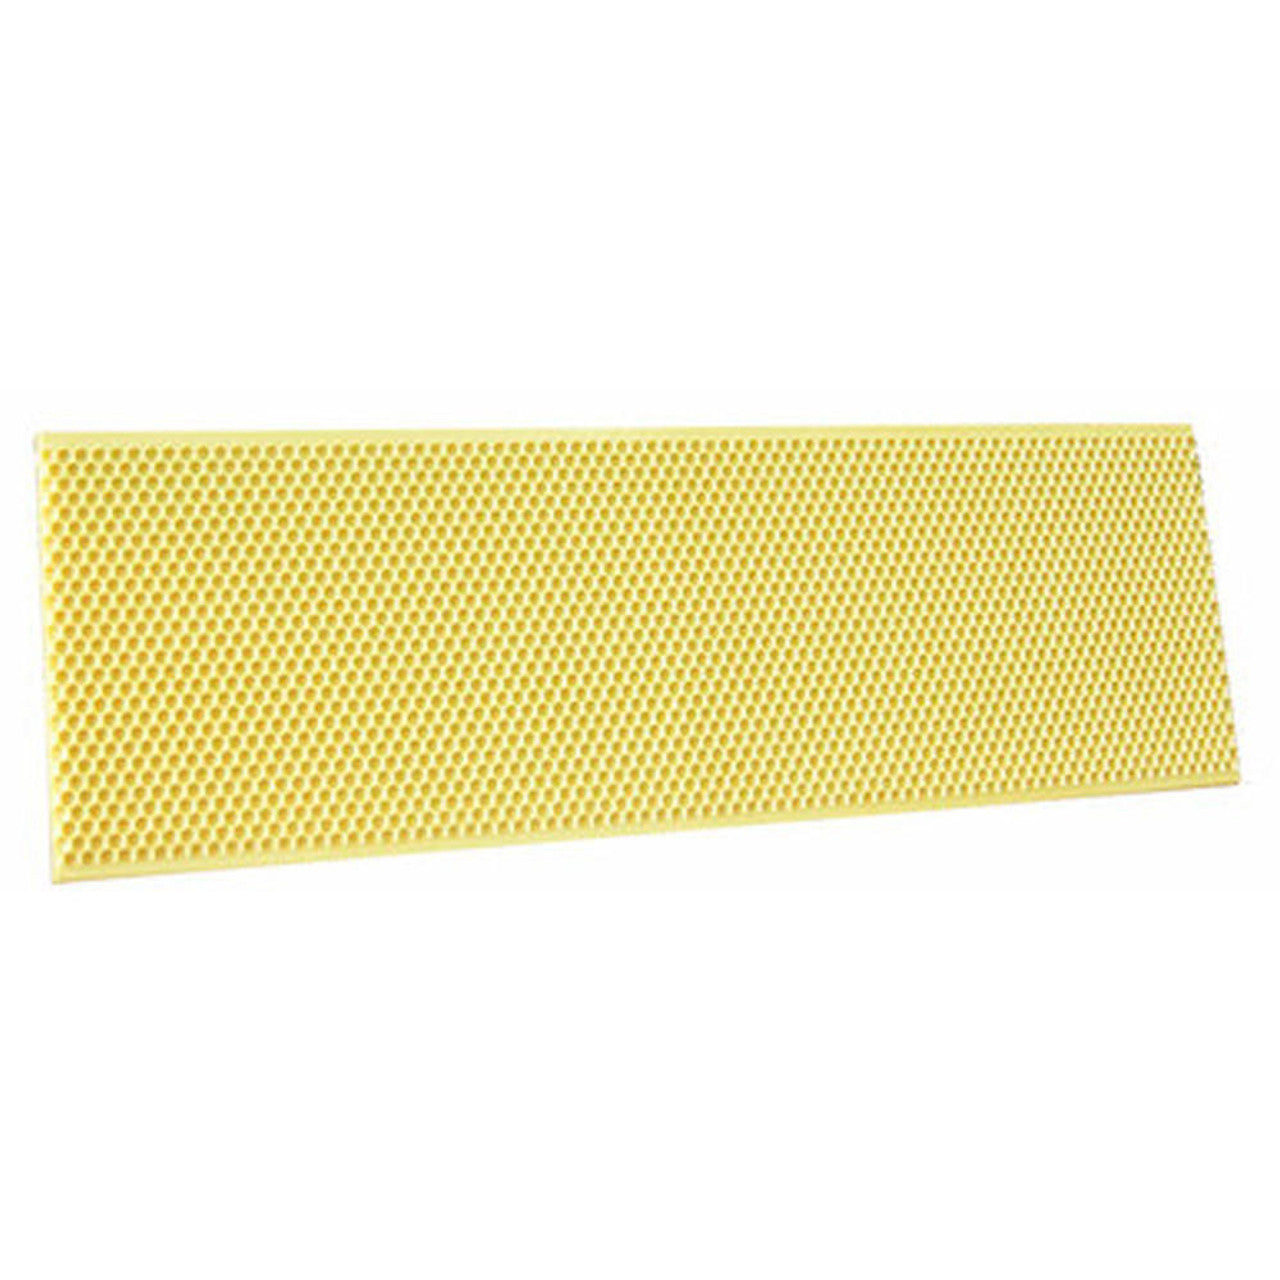 BZ17P-Plastic Wax Coated Foundation for Medium Frames - Yellow or Black